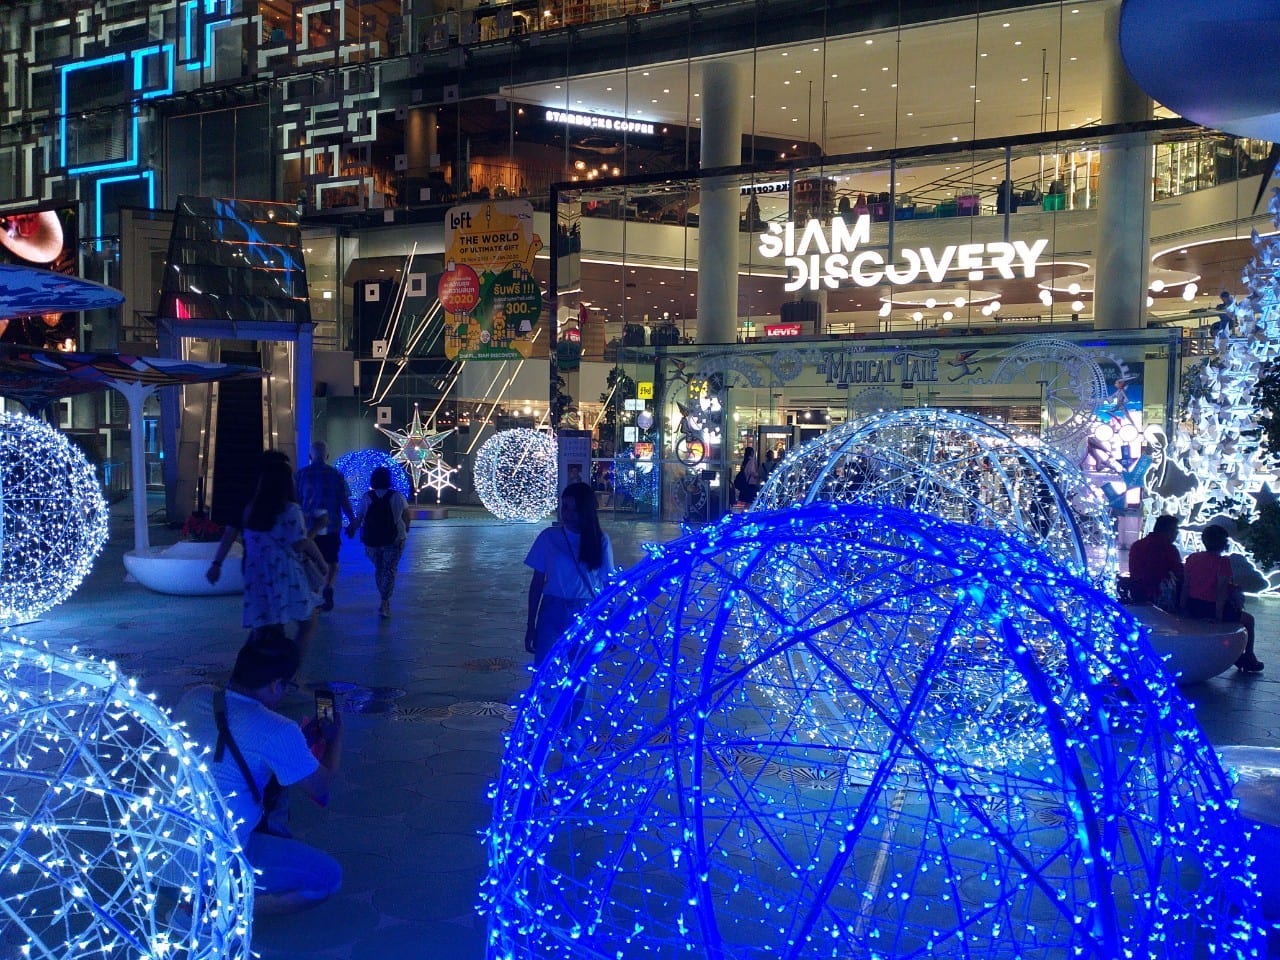 Xmas decorations at Siam Discovery 2019